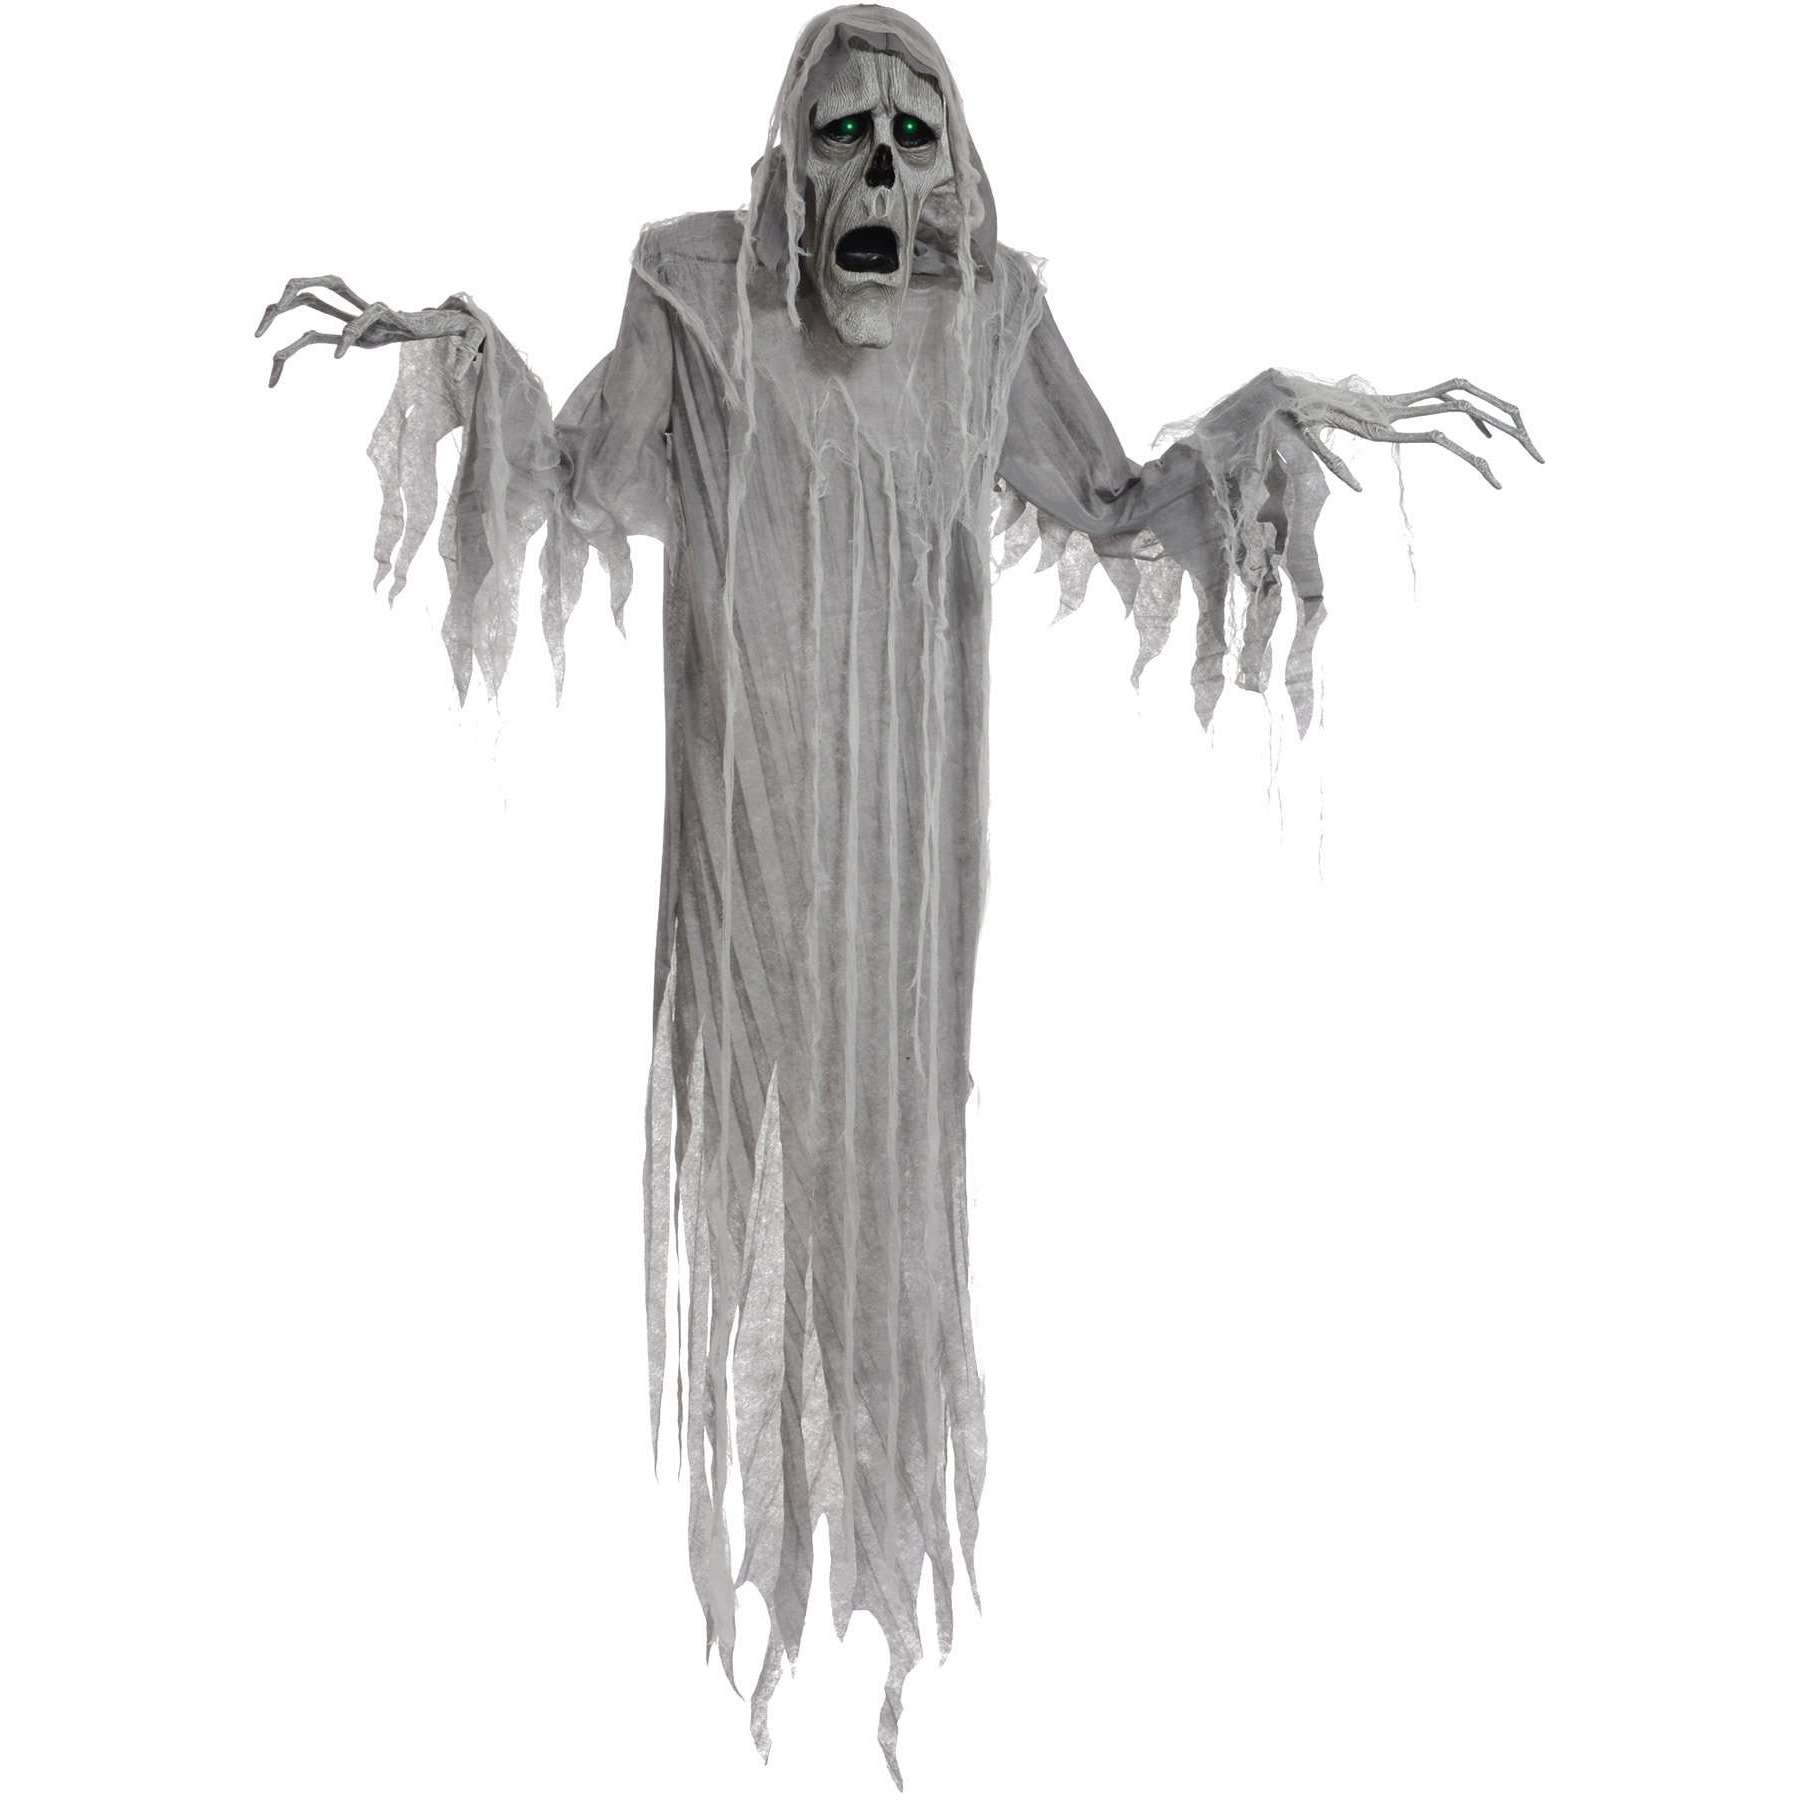 72" Hanging Phantom Reaper with Light Up Eyes Animated Prop